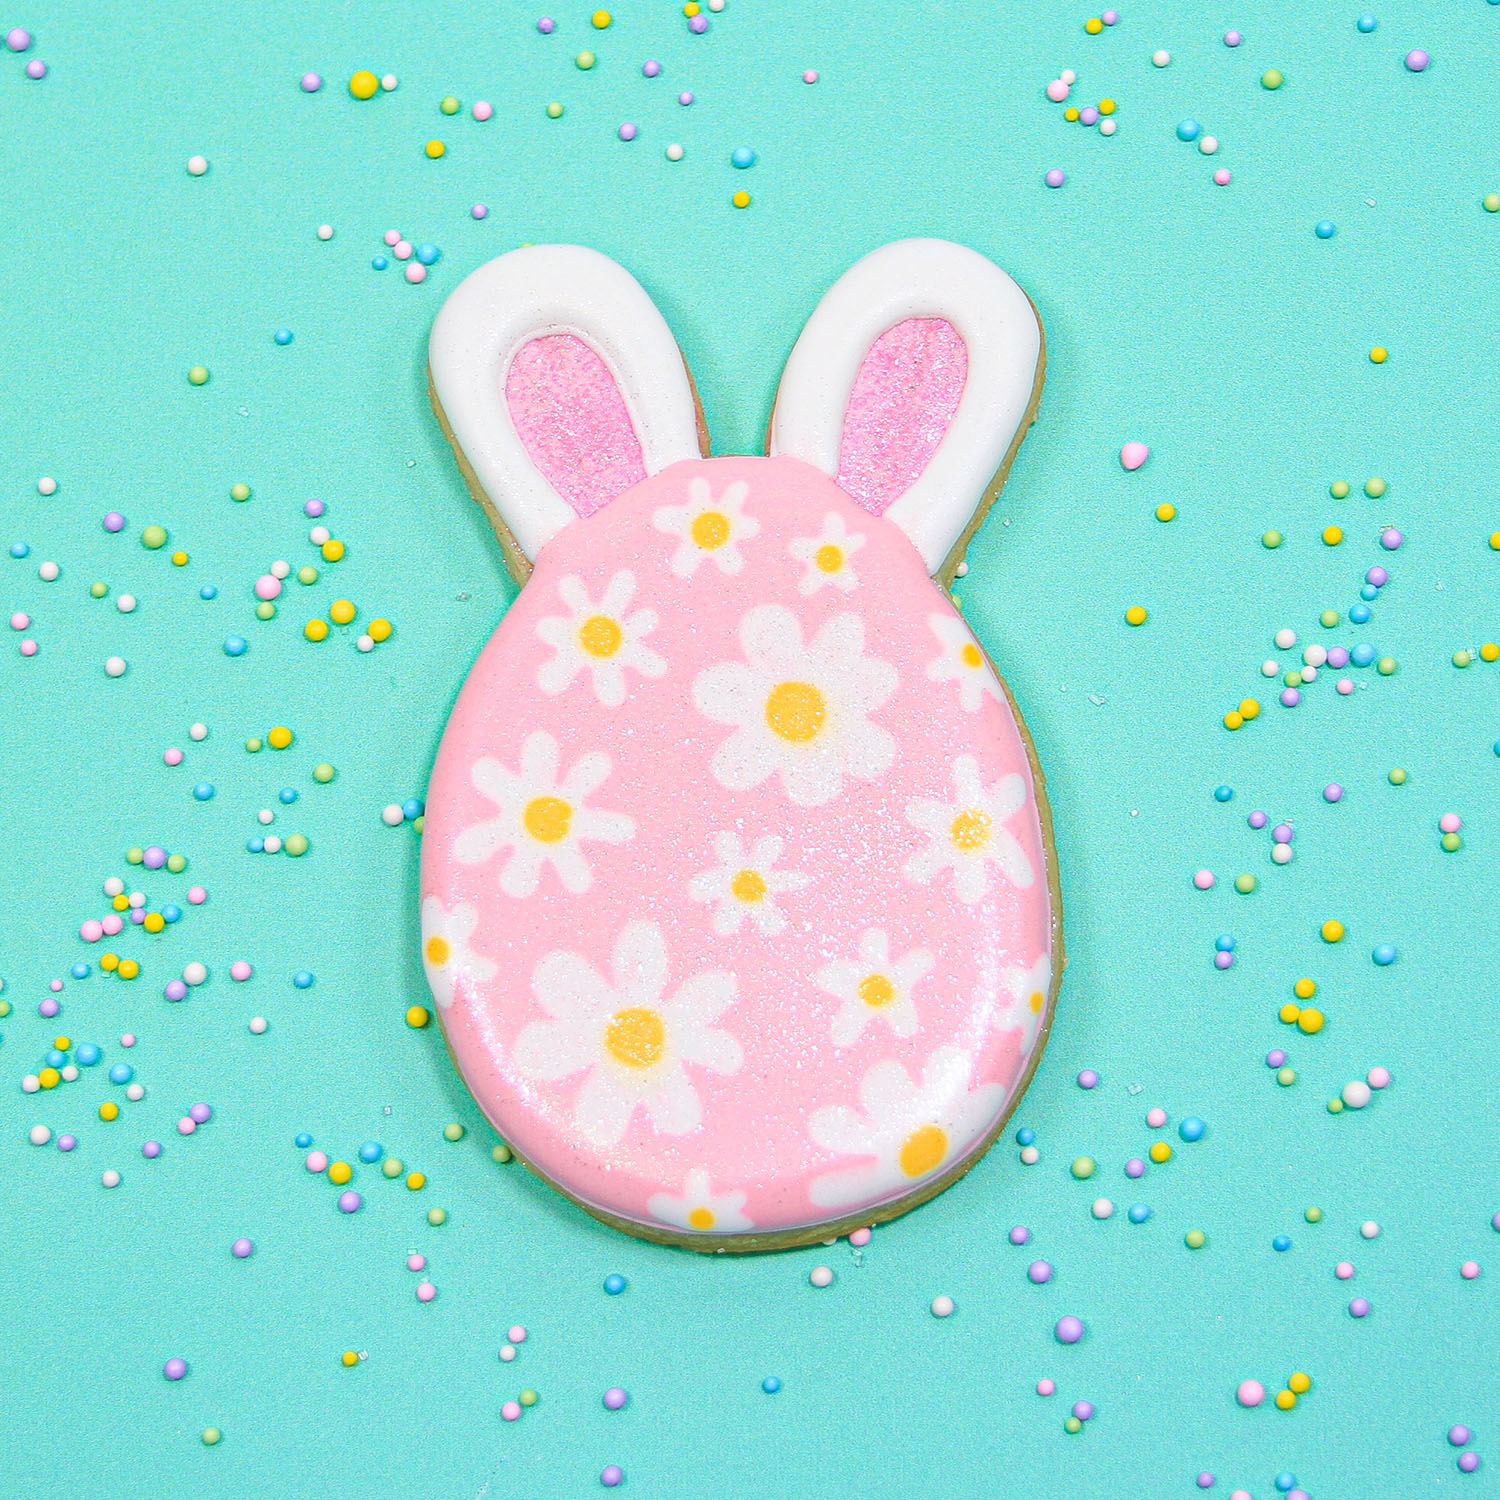 Royal icing decorated easter egg bunny with flowers and sparkles